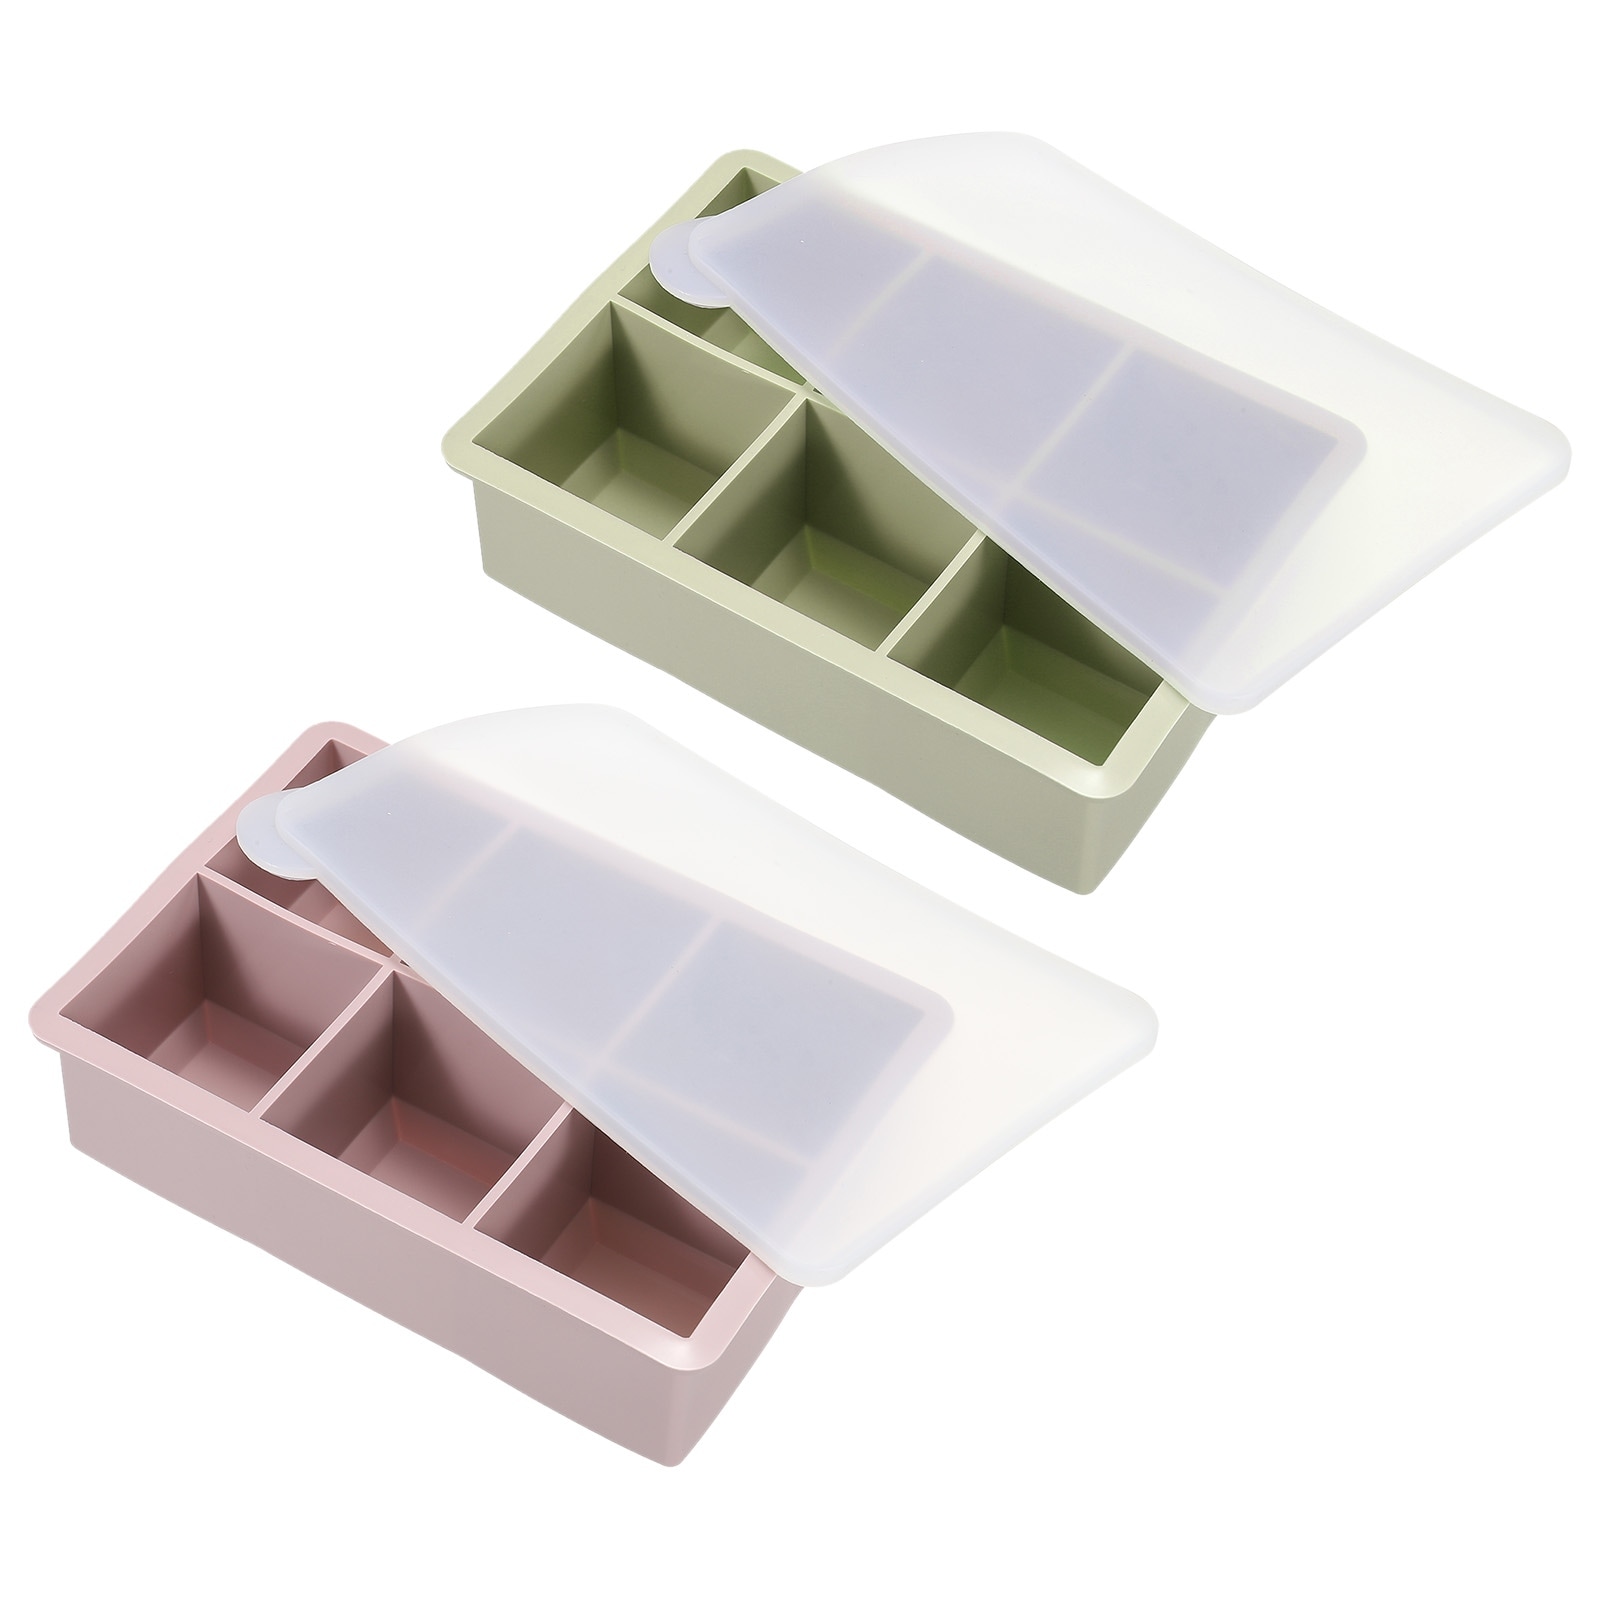 The Ultimate Mini Ice Cube Maker Pink Silicone Bucket Ice Mold and